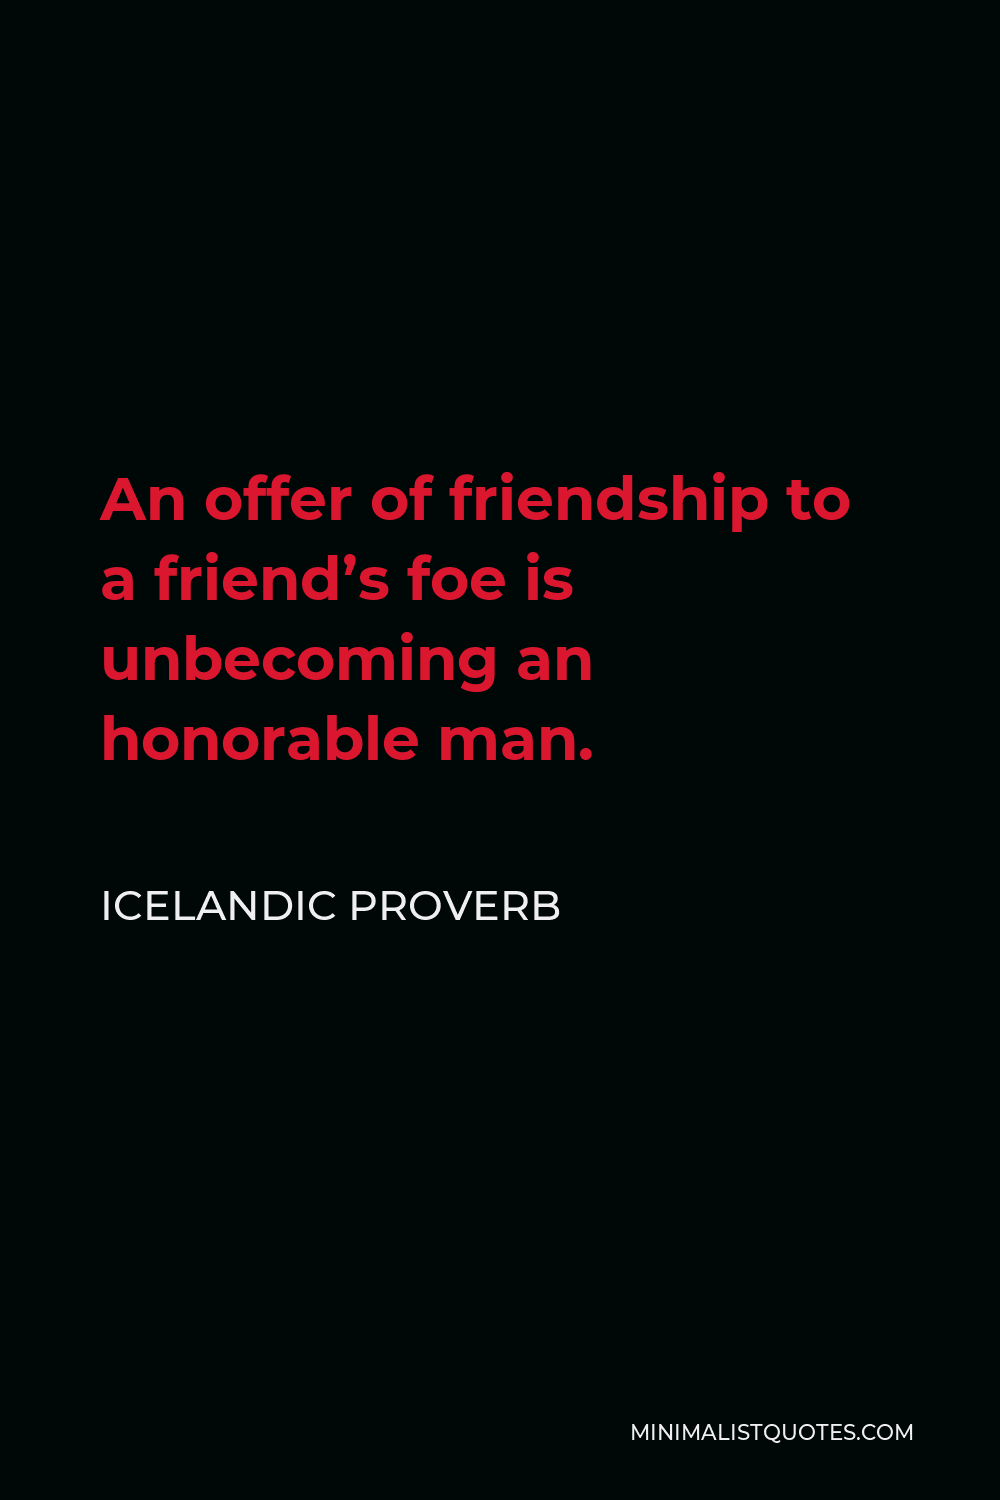 Icelandic Proverb Quote - An offer of friendship to a friend’s foe is unbecoming an honorable man.